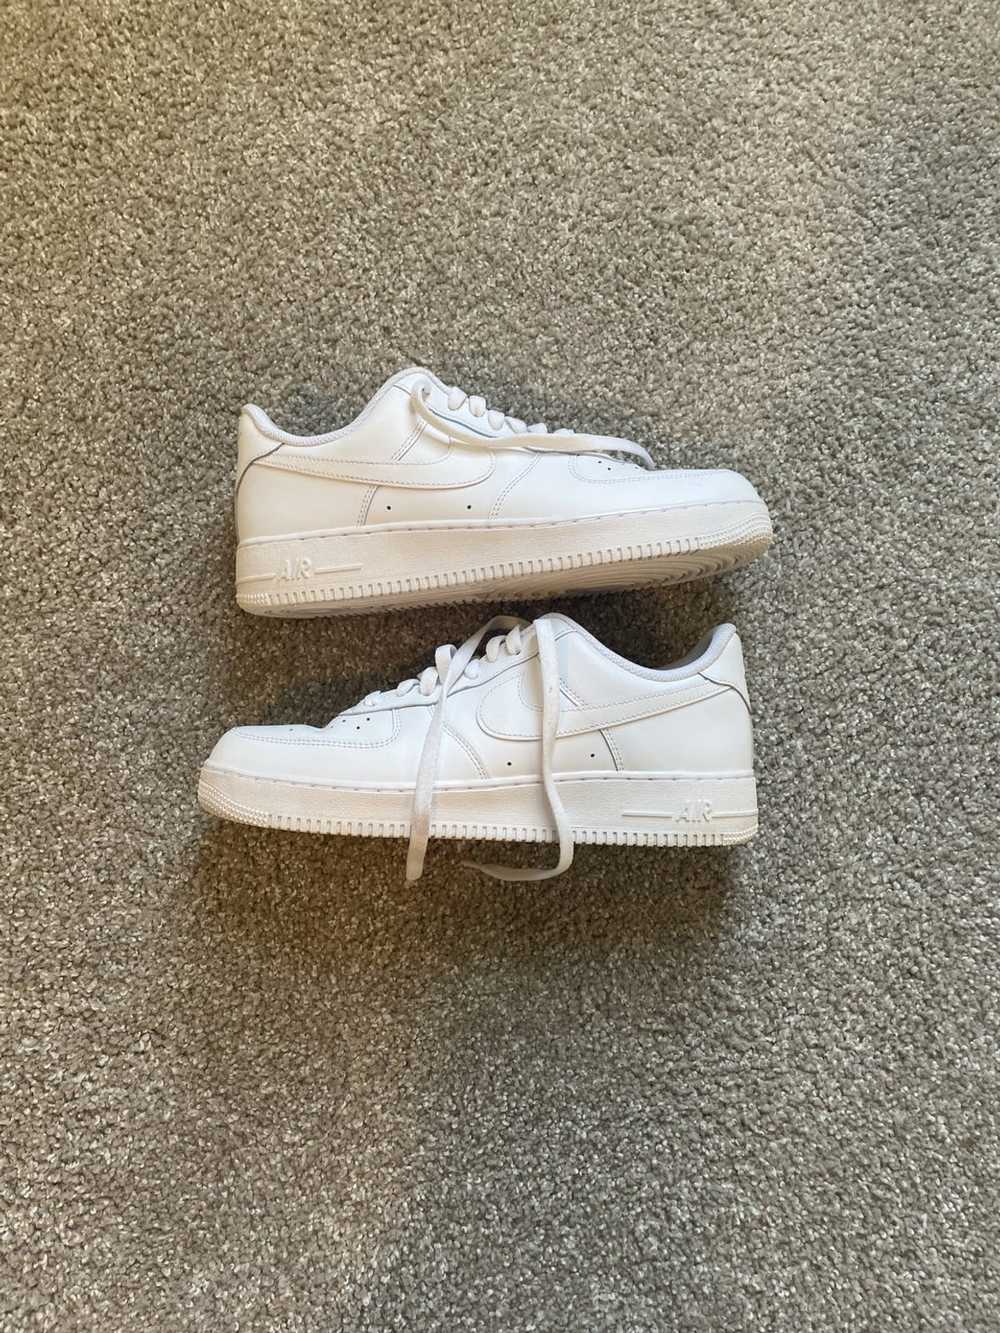 Nike Air Force 1 low white - image 3